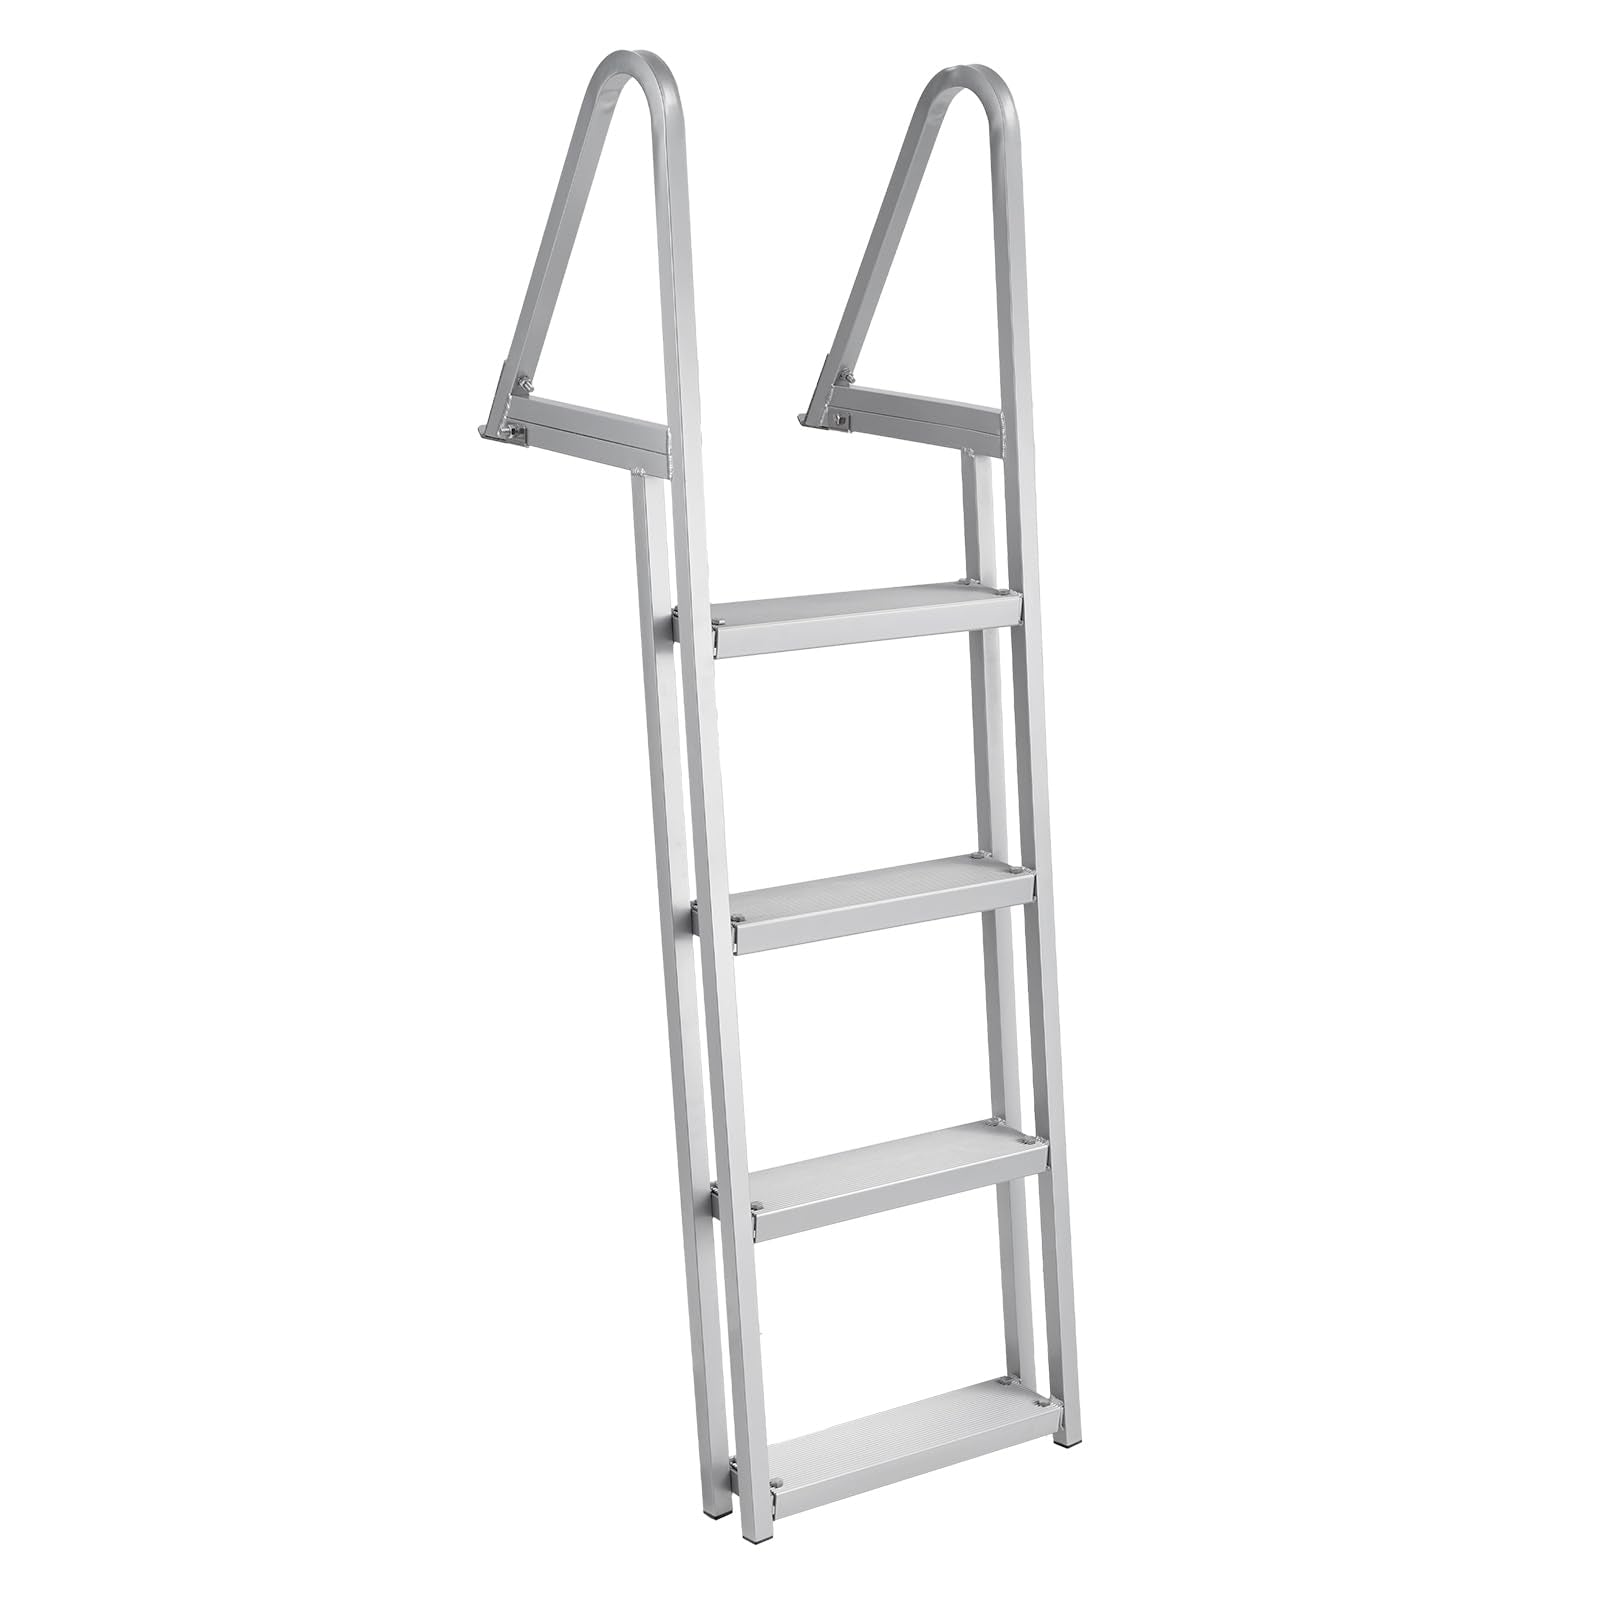 GARVEE Removable Dock Ladder 4 Steps + Anti-Corrosion 6063 Aluminum + Reinforced Dual Handrails + Nonslip Pedals + Adjustable Height + 500lbs Capacity + Suitable for Lake/Pool/Boarding